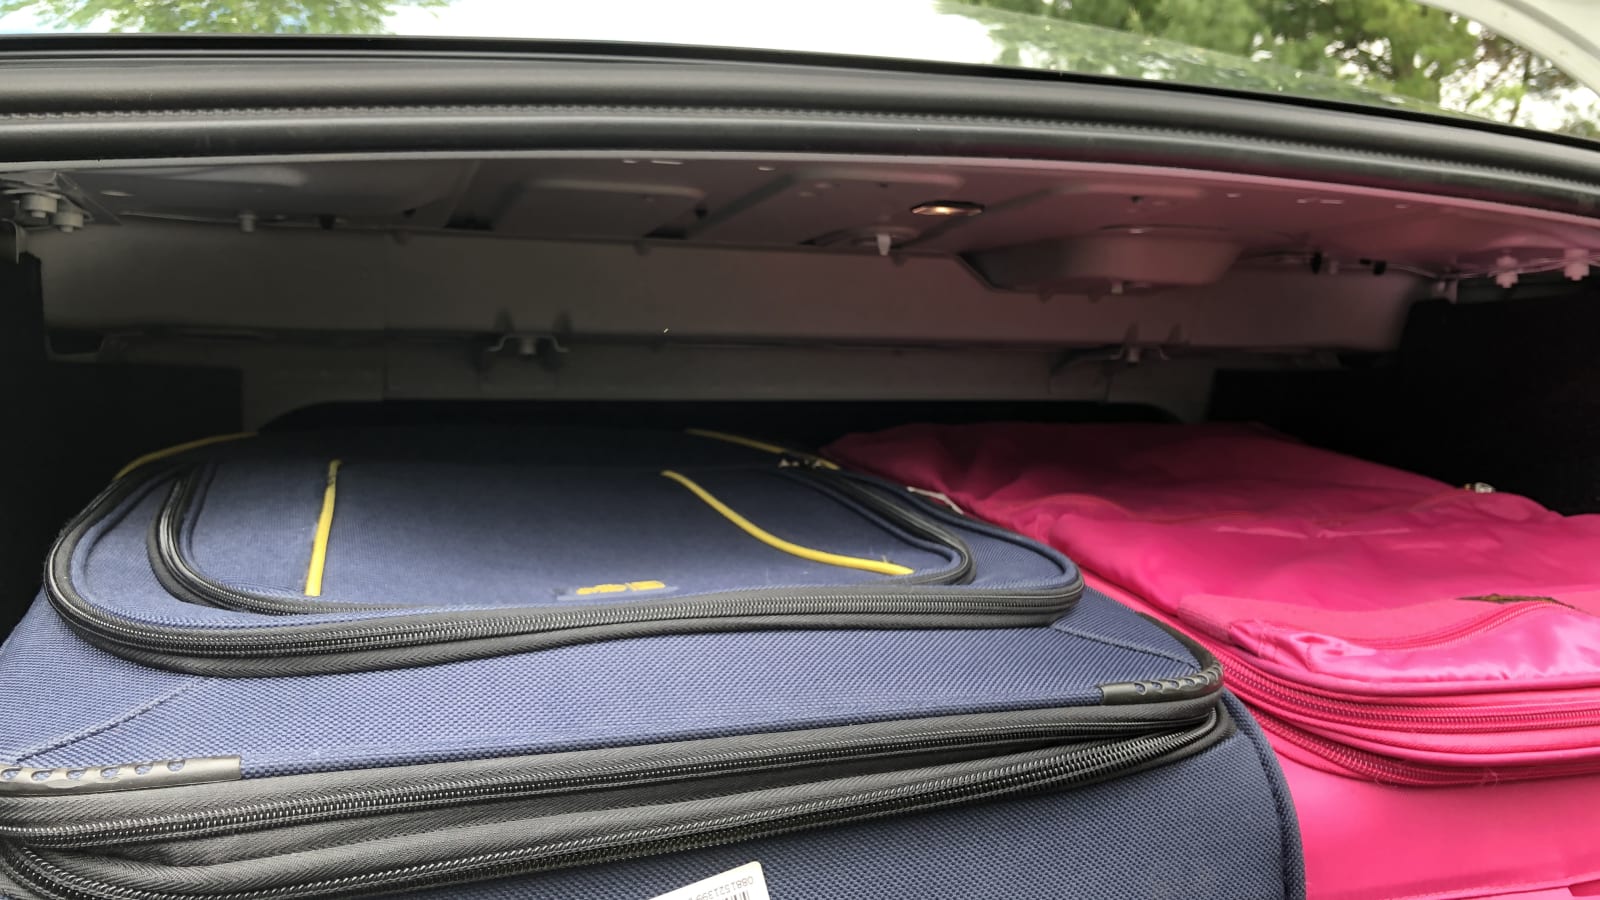 2020 Volvo S60 T8 Luggage Test | Long-term utility update 12 Rice Tire